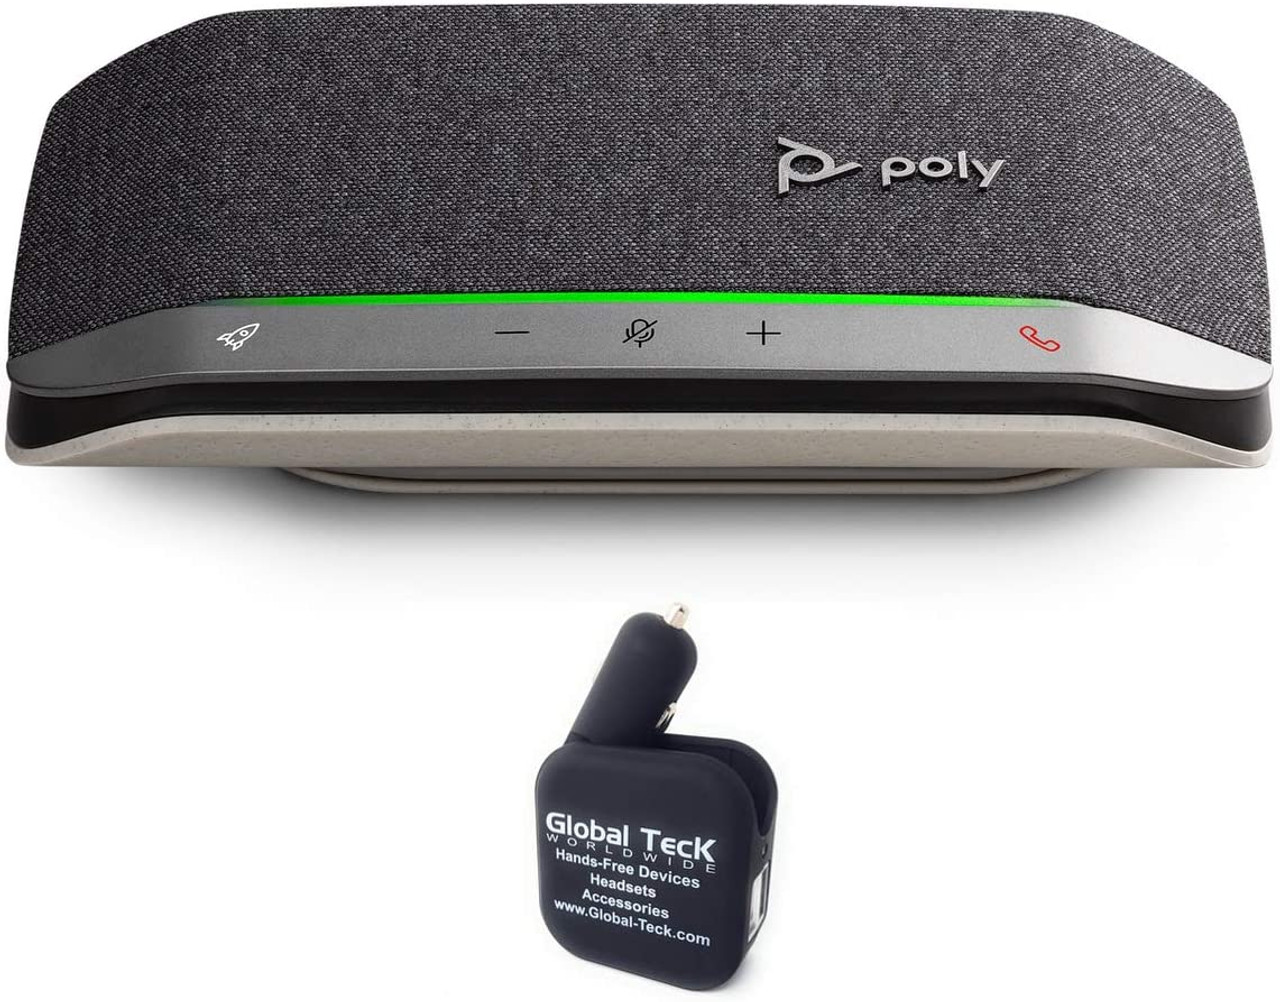 Poly SYNC 20 Bluetooth Speakerphone, USB A, Bonus Charger - Streaming  Voice/Video, Distance Learning